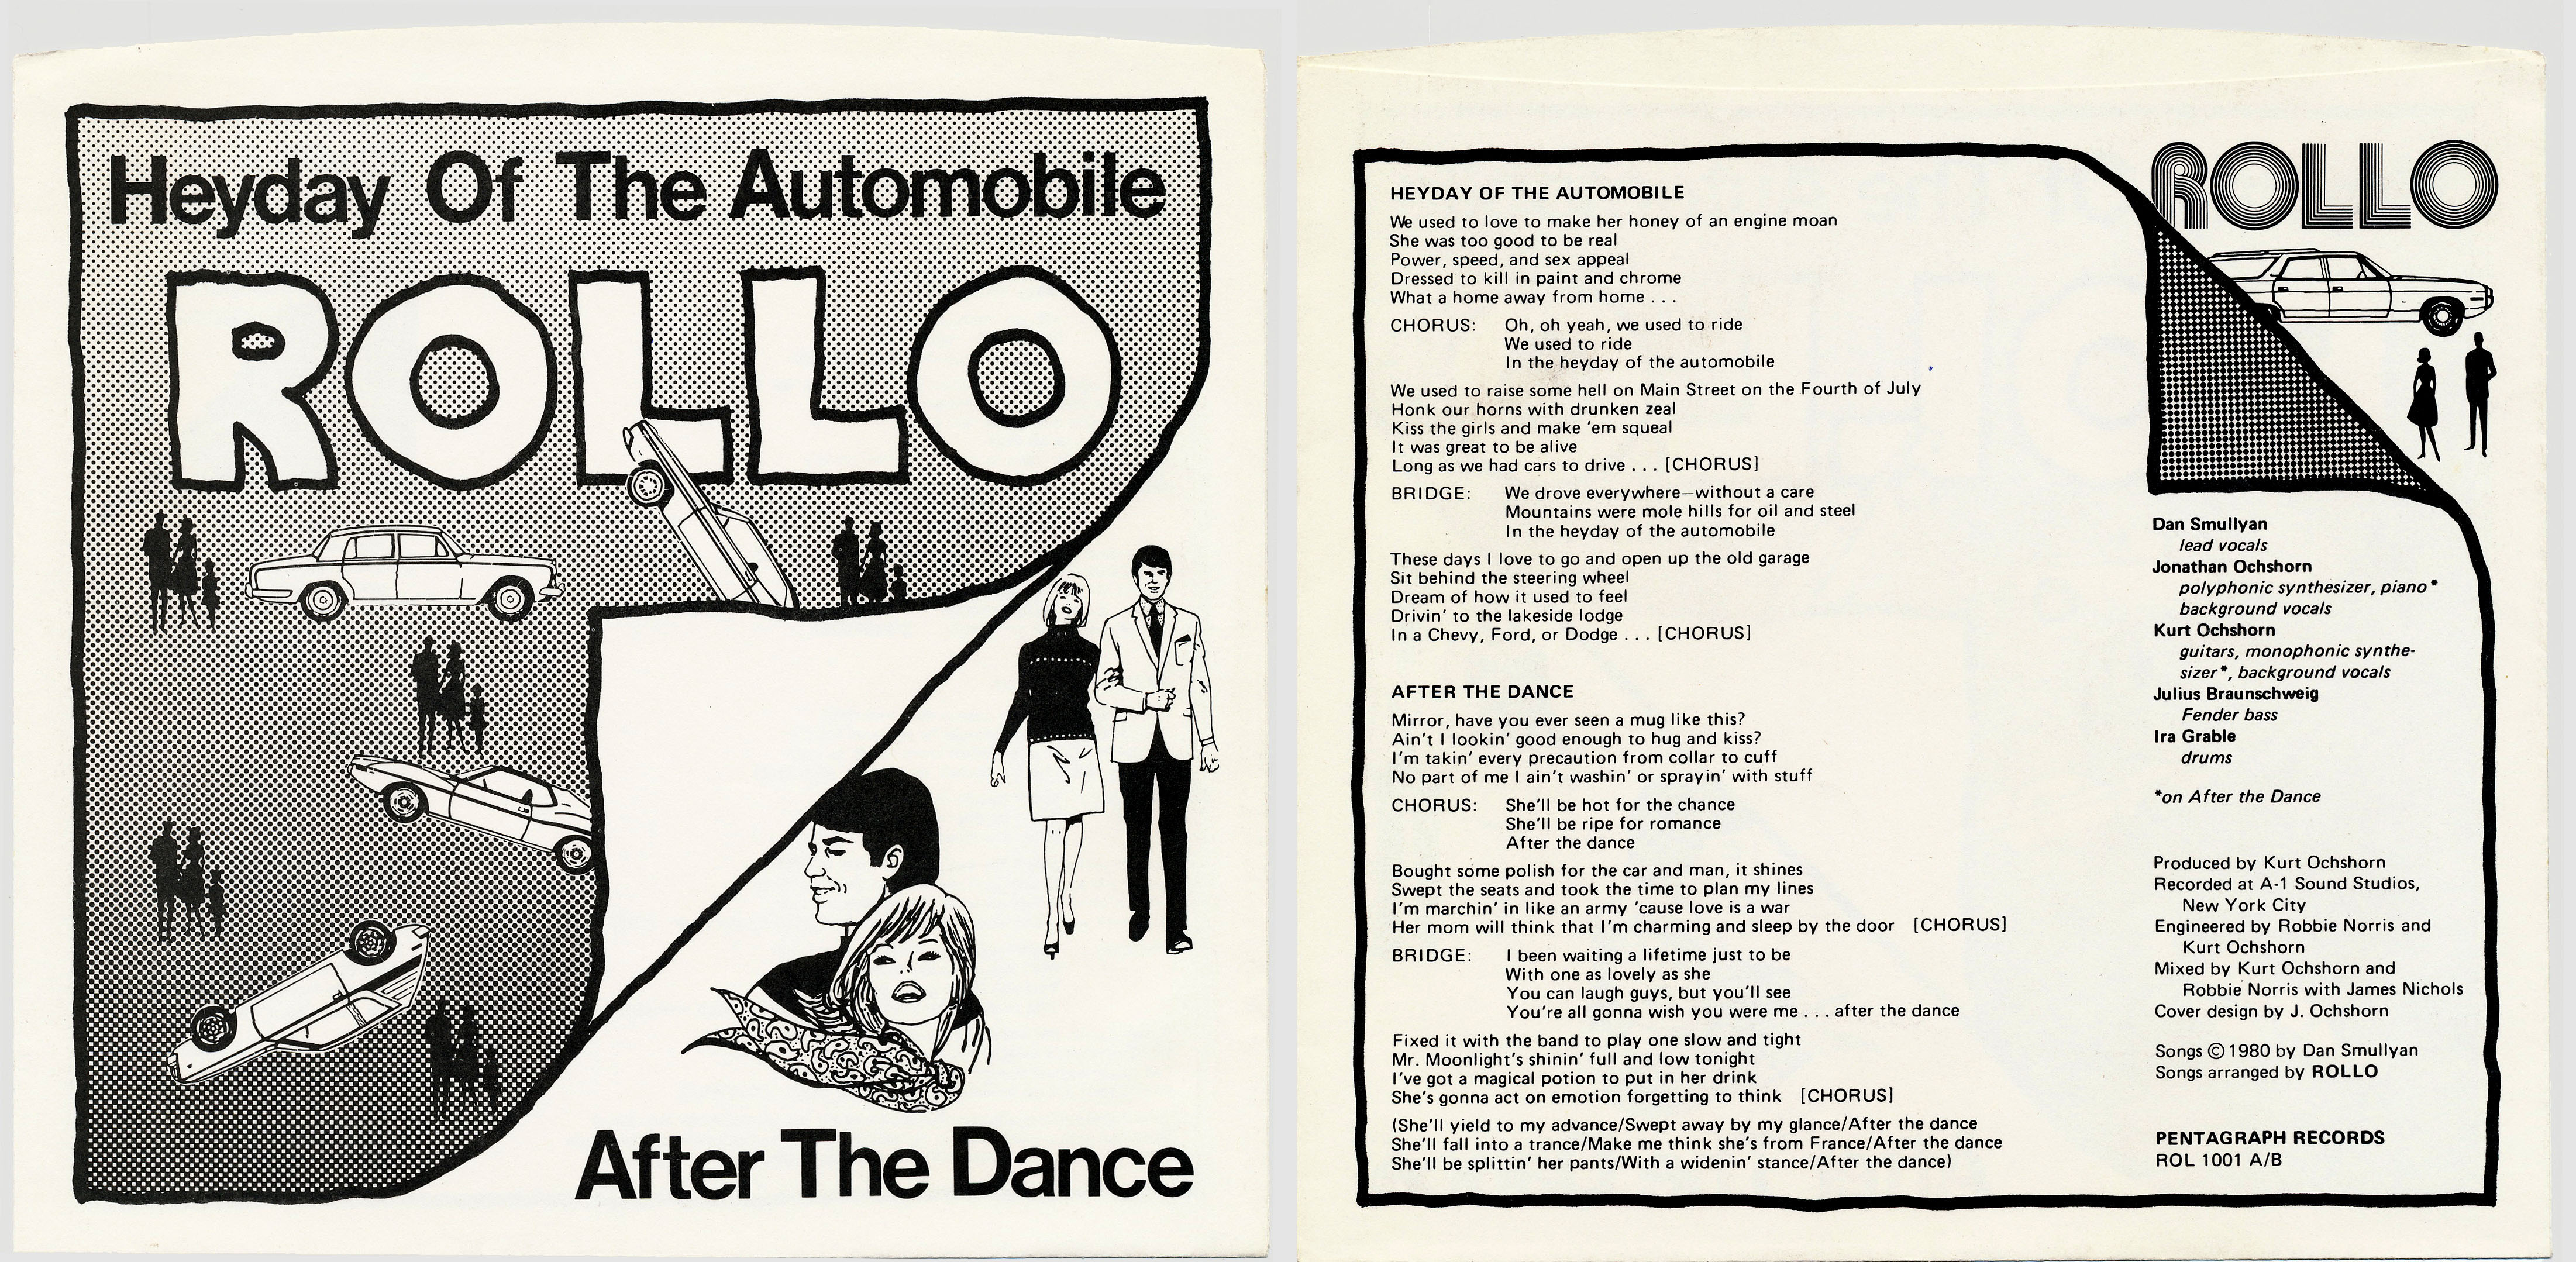 Rollo record sleeve for 45-rpm record: Heyday of the Automobile and After the Dance. Copyright 1980 (undated)